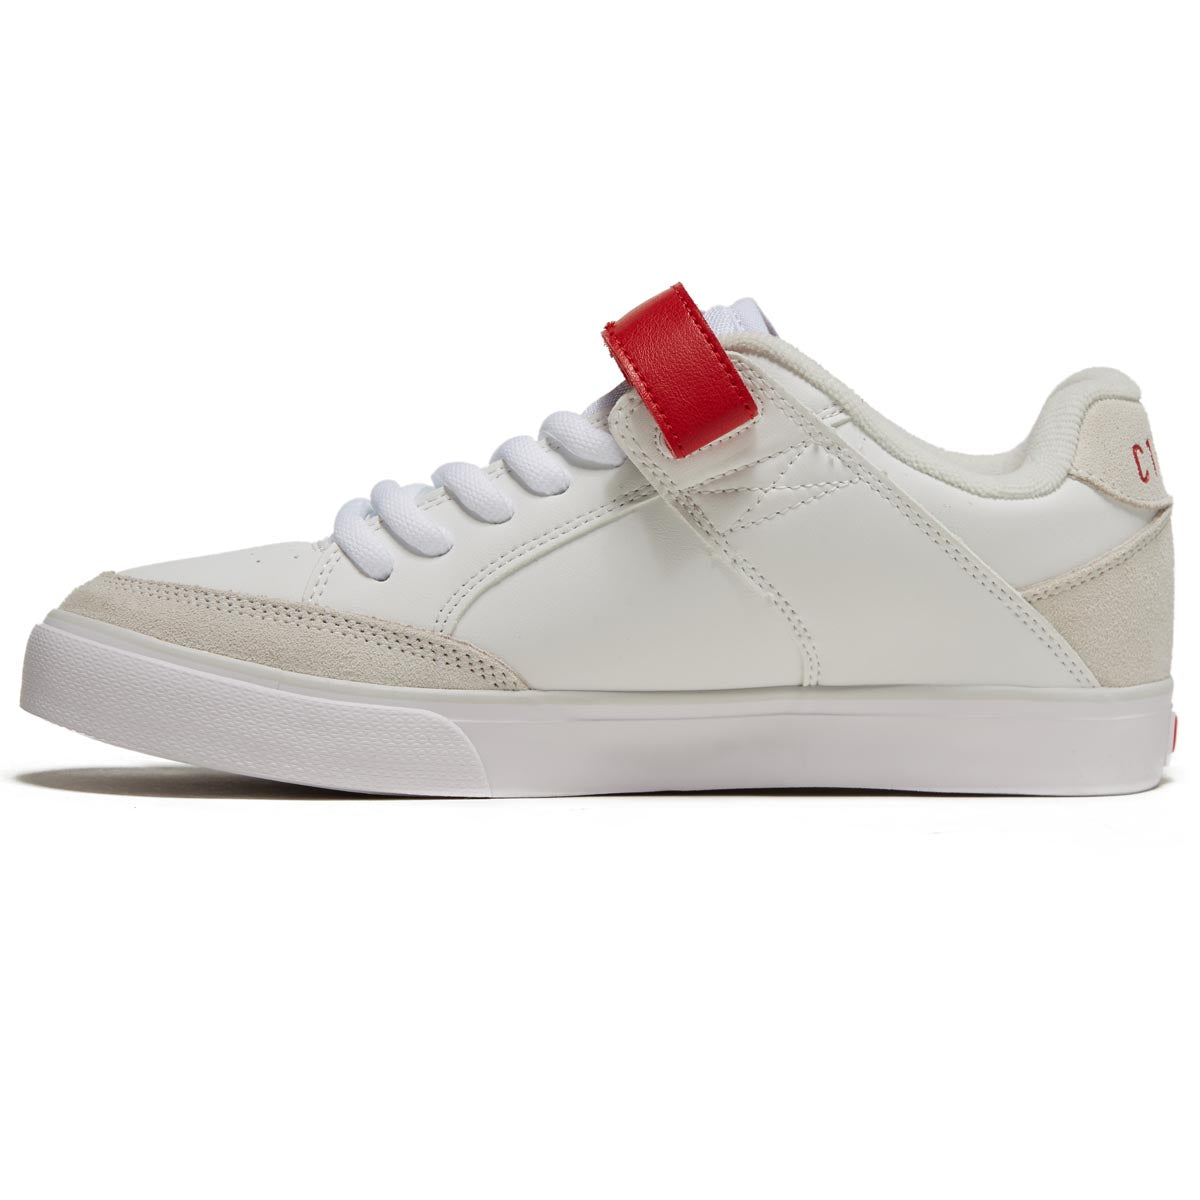 C1rca 205 Vulc Shoes - White/Red image 2